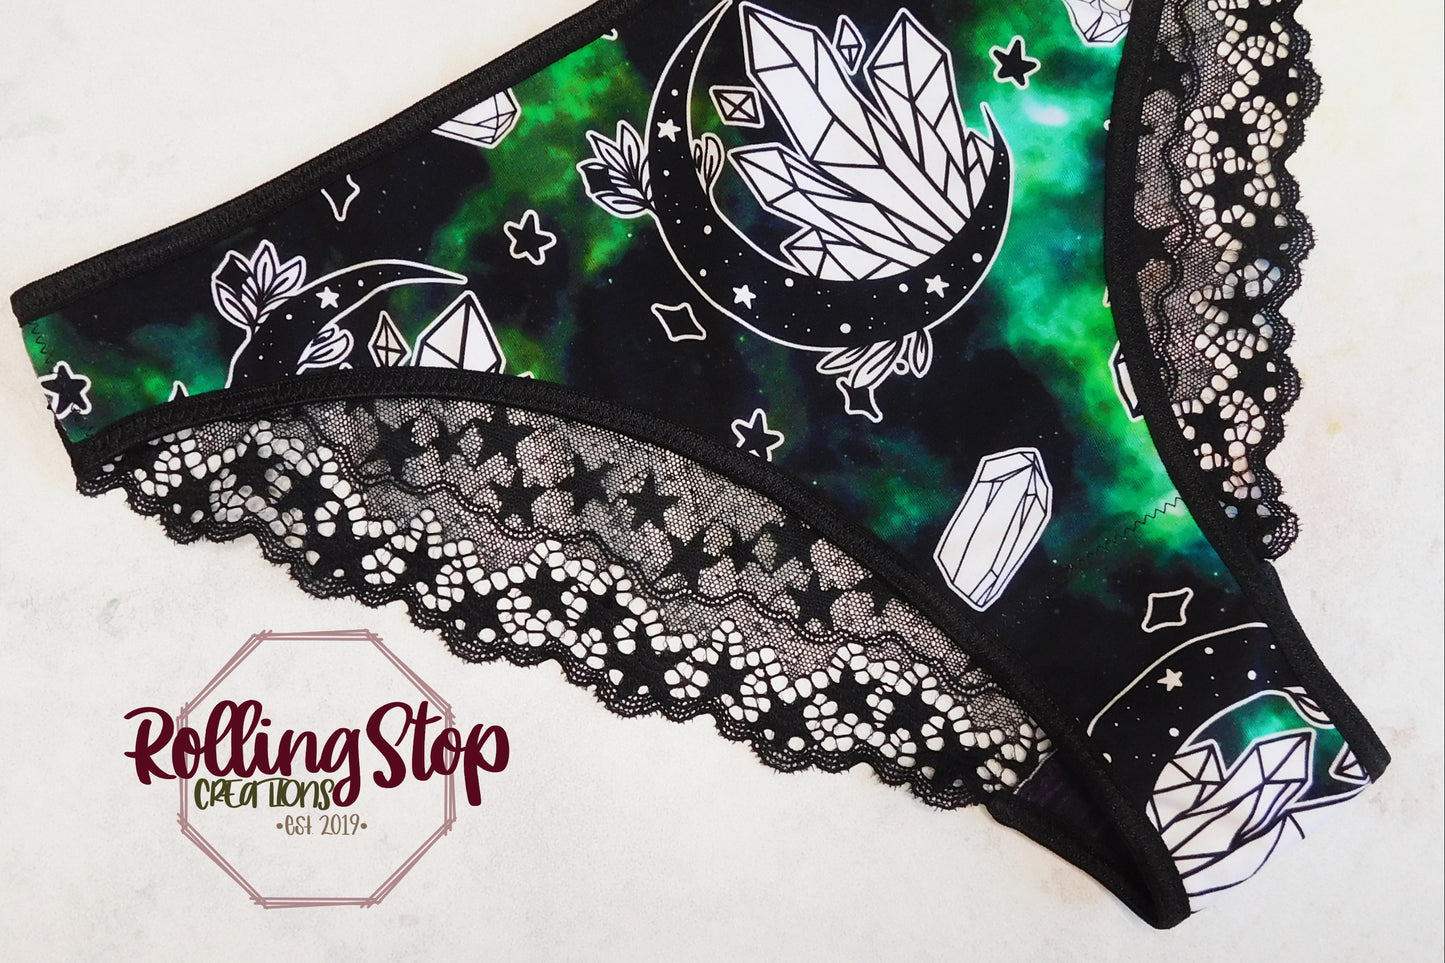 Absinthe Crystals Lace Back Pantydrawls by Rolling Stop Creations sold by Rolling Stop Creations Lace - Lingerie - Pant